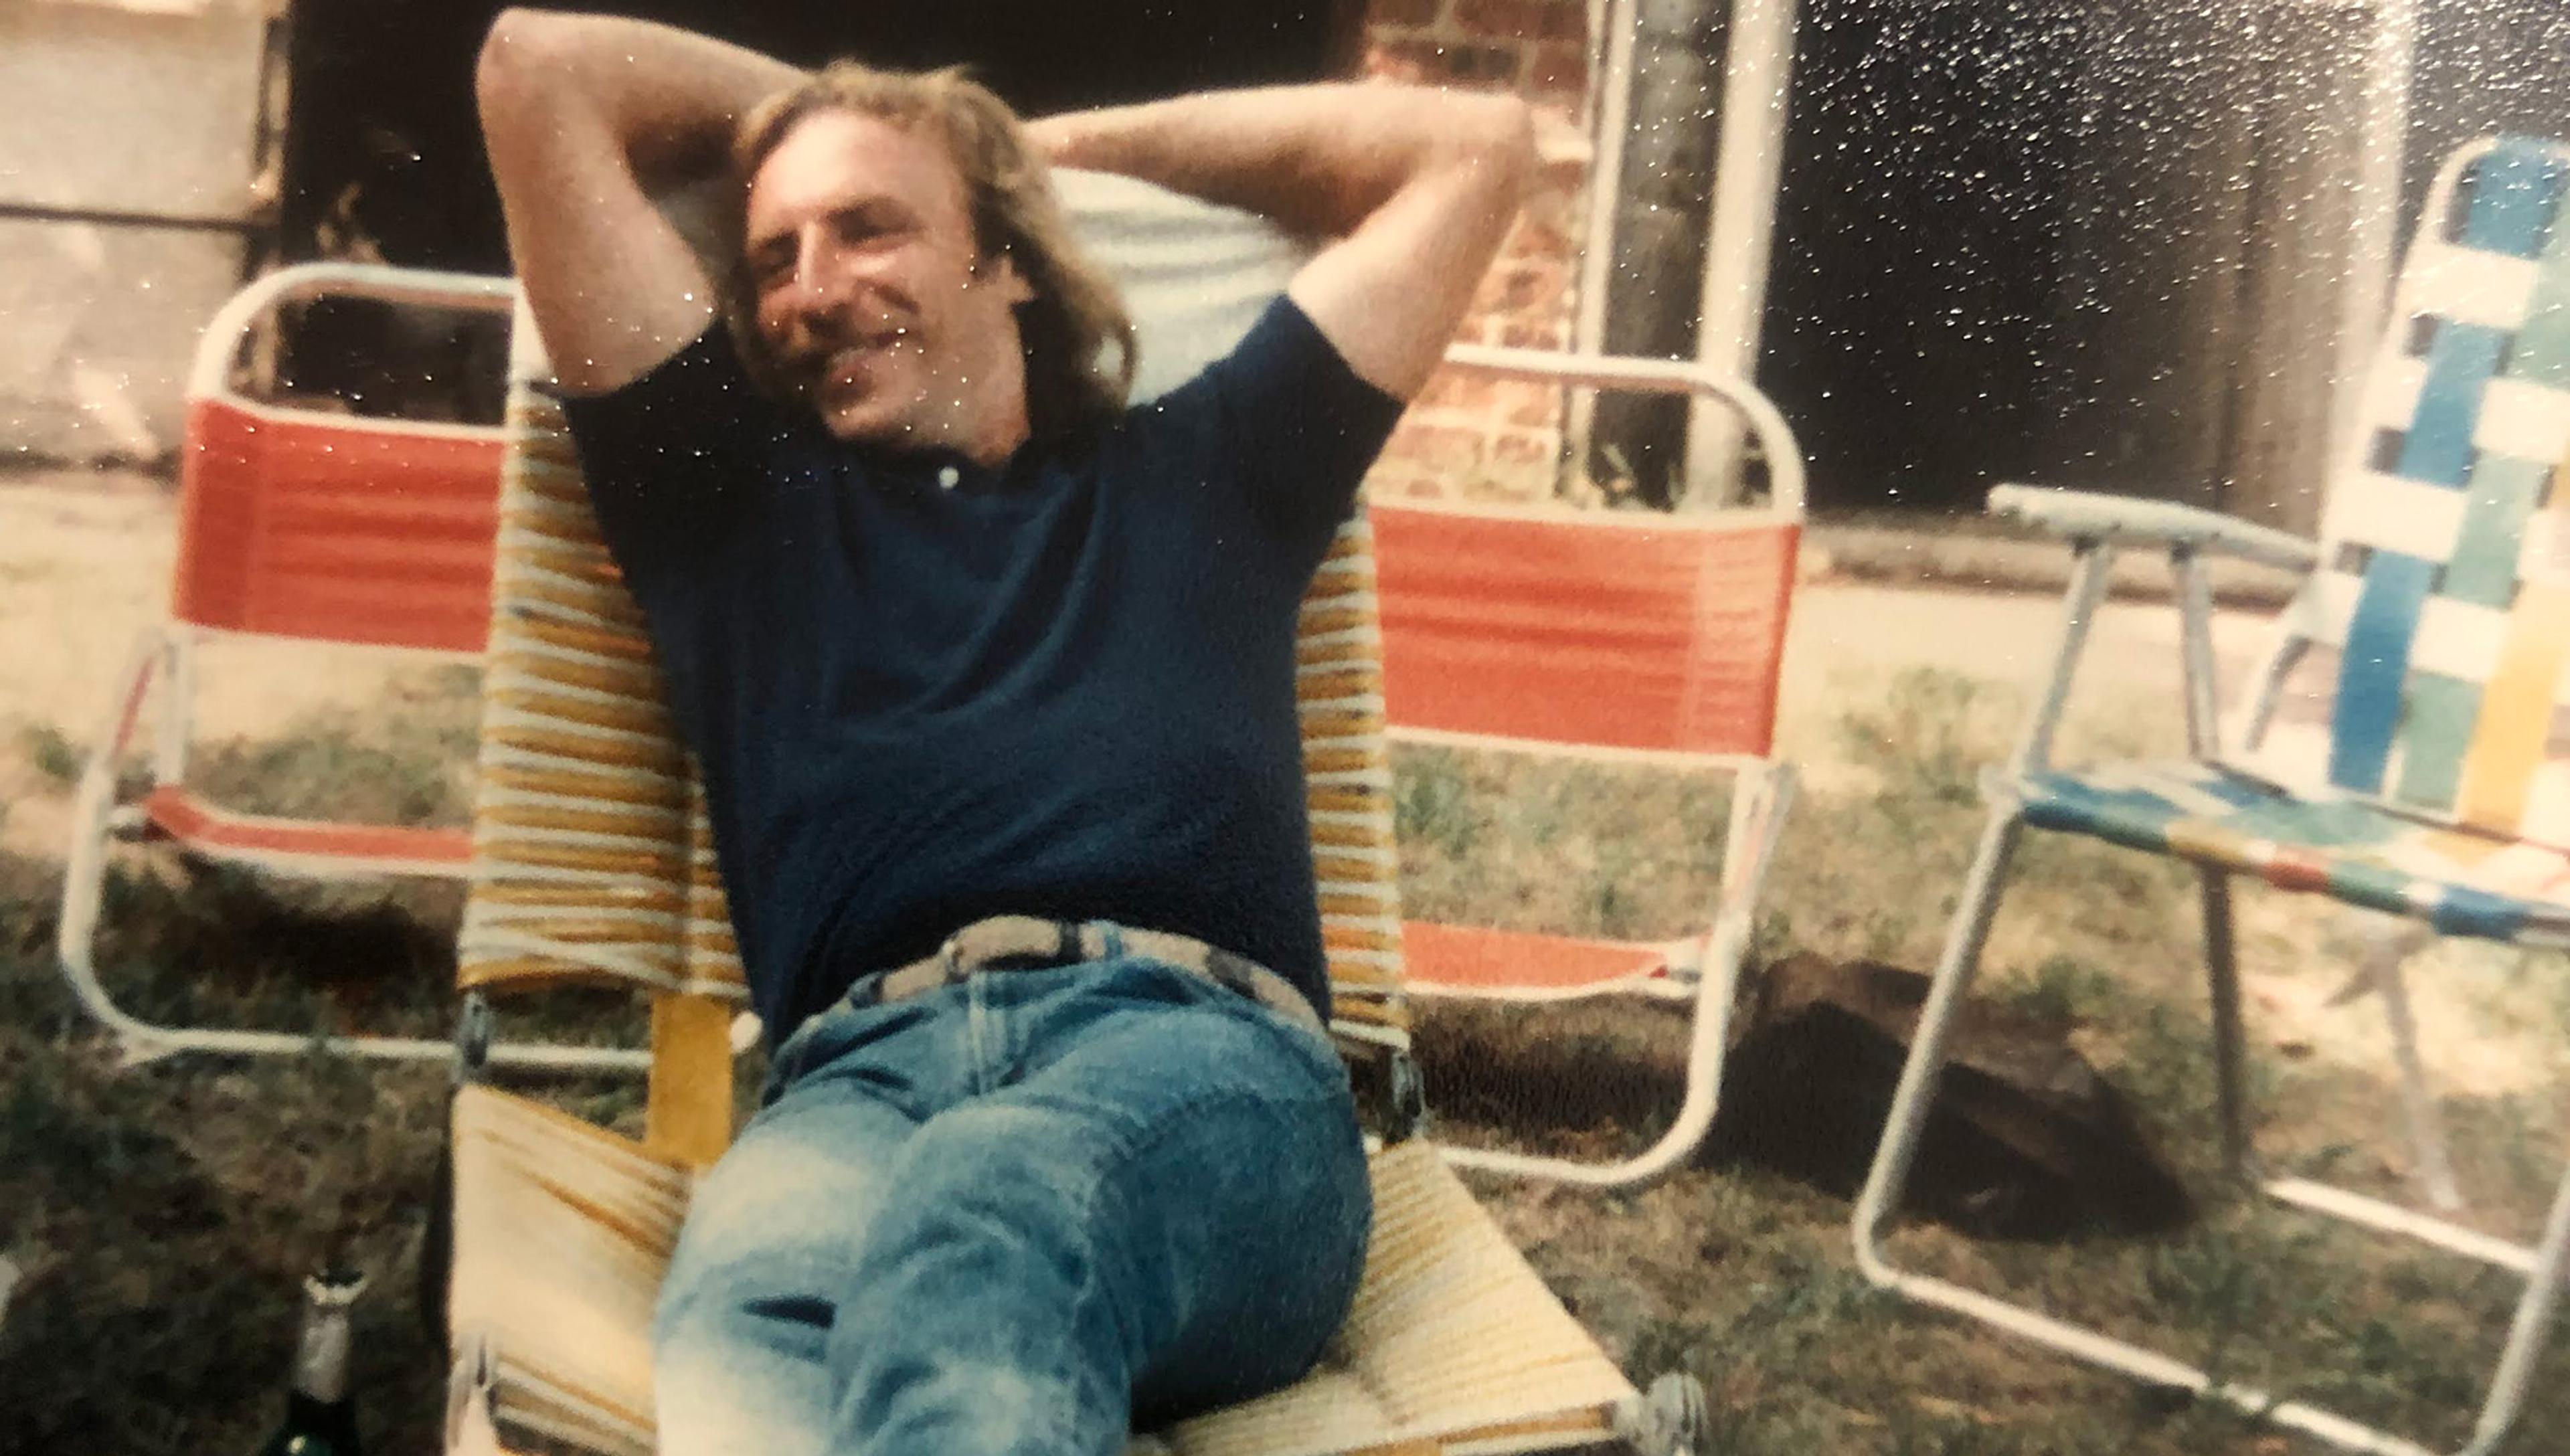 Man relaxing on a striped lounge chair with hands behind his head, outside on a lawn, flanked by other coloured chairs and an opened beer bottle nearby.